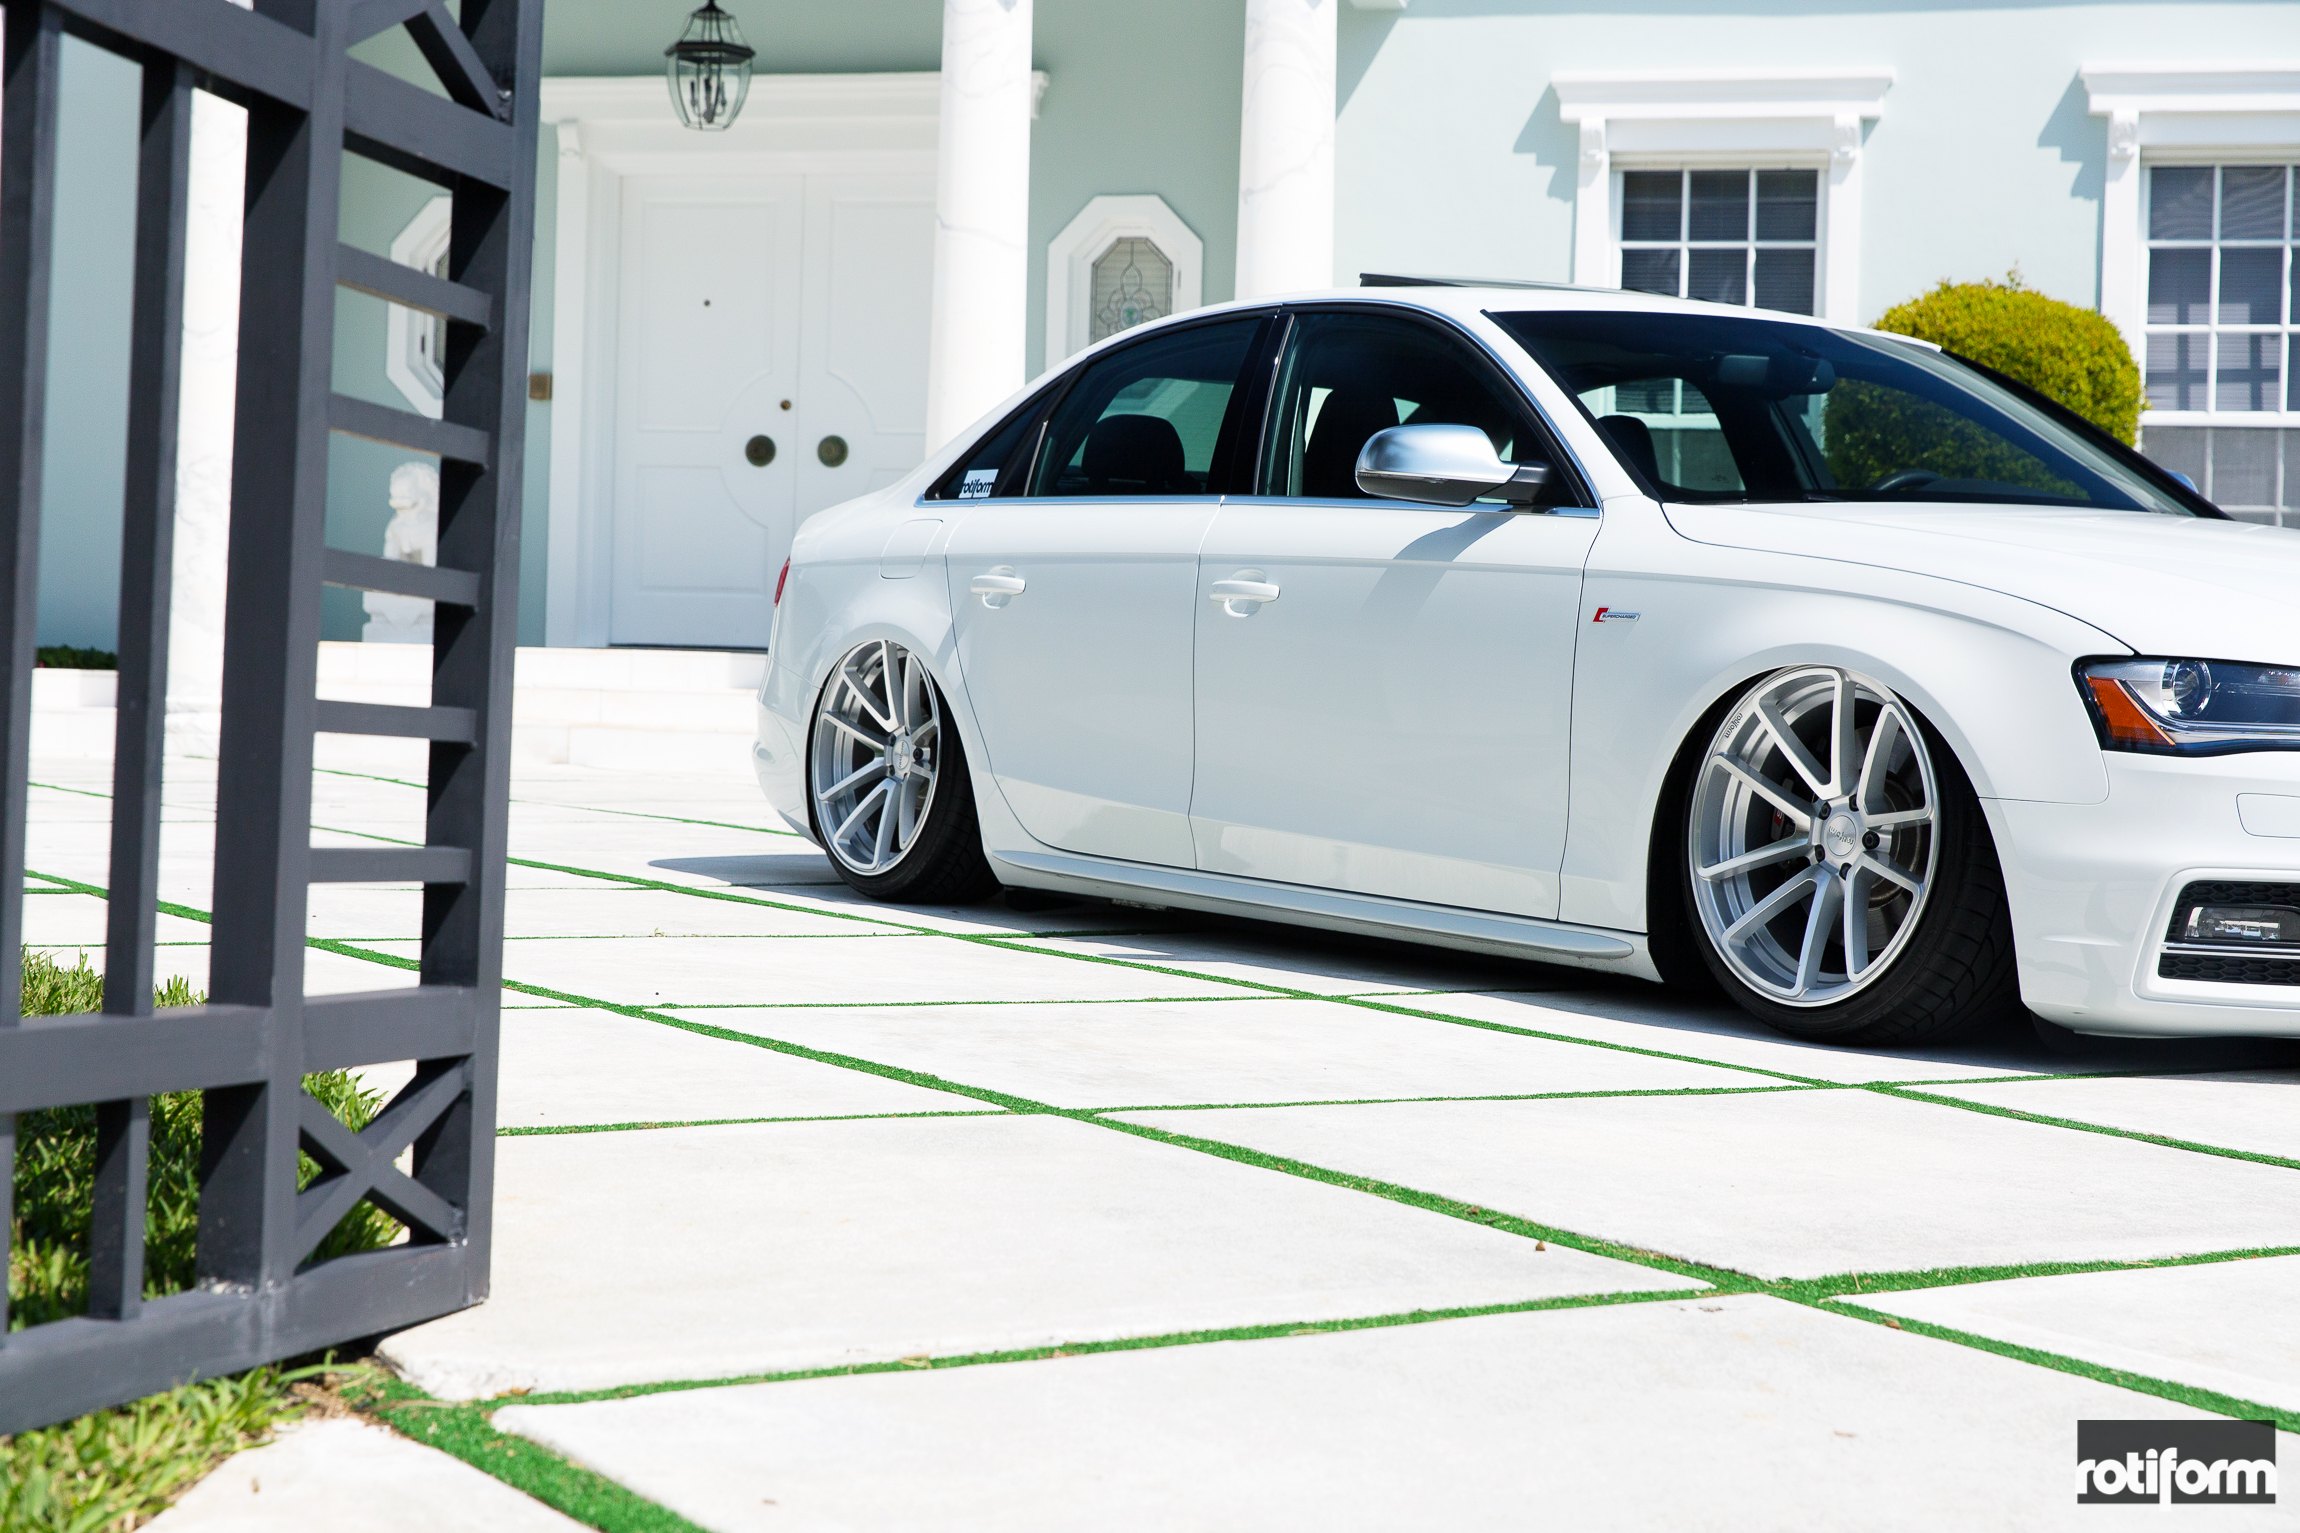 Aftermarket Side Mirrors on White Stanced Audi S4 - Photo by Rotiform